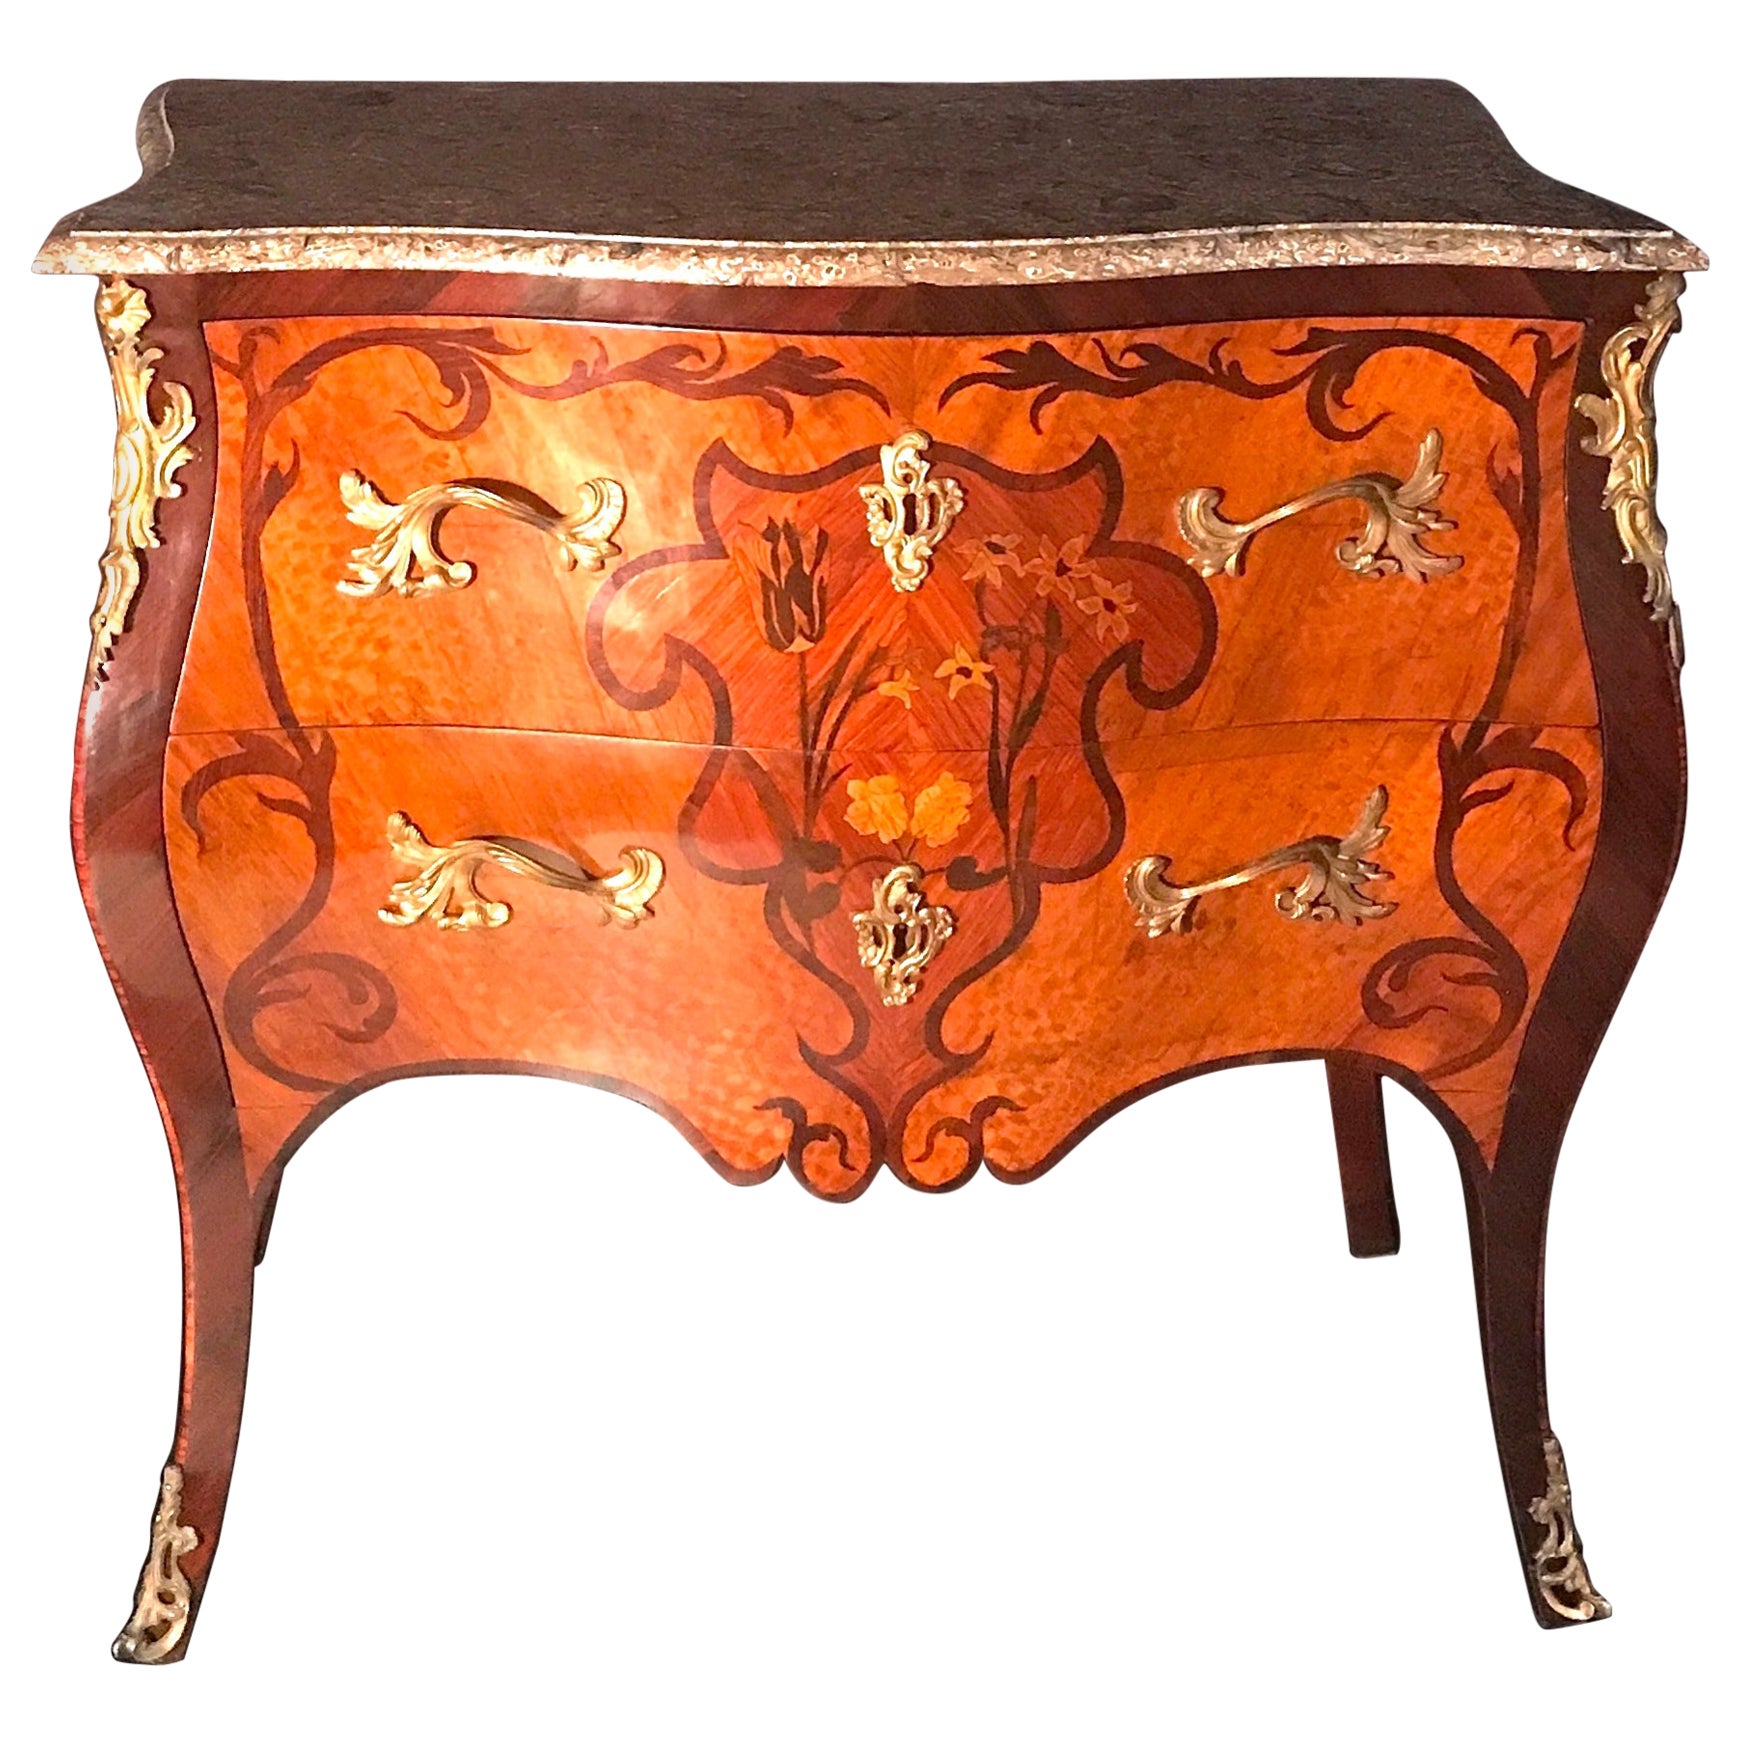 Elegant French 18th Century Commode Louis XV Period For Sale